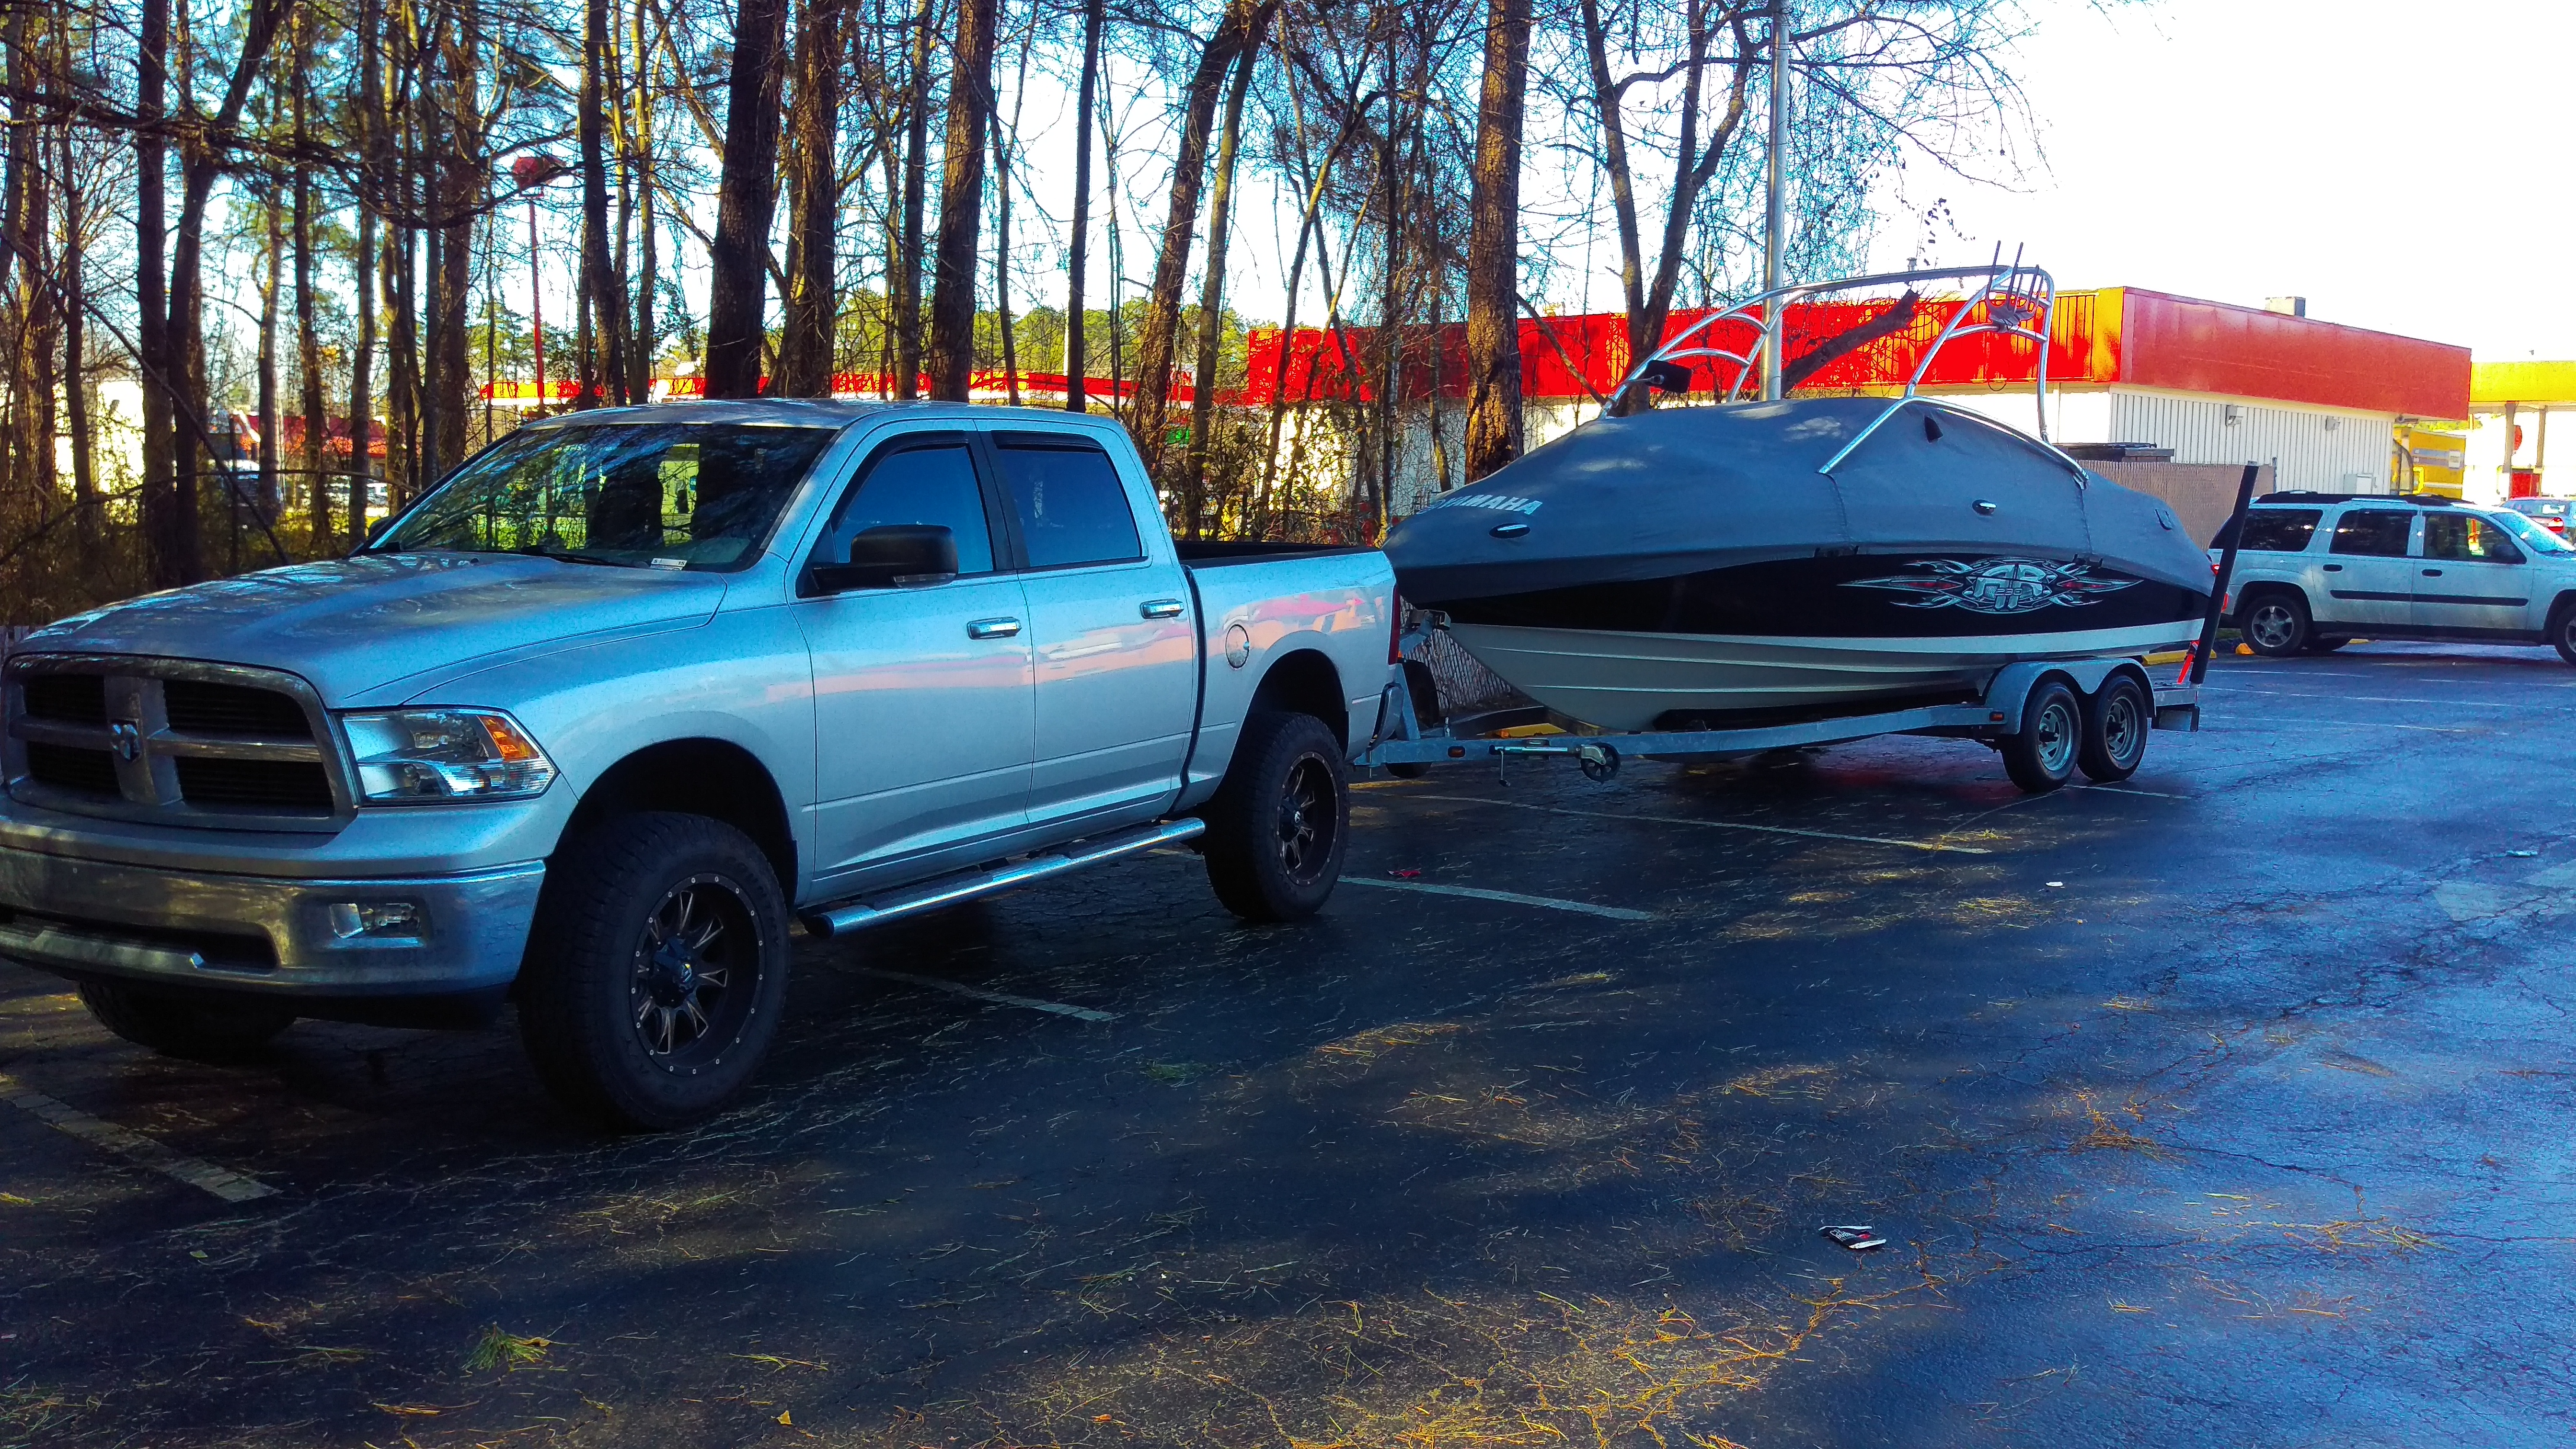 2nazt truck and boat